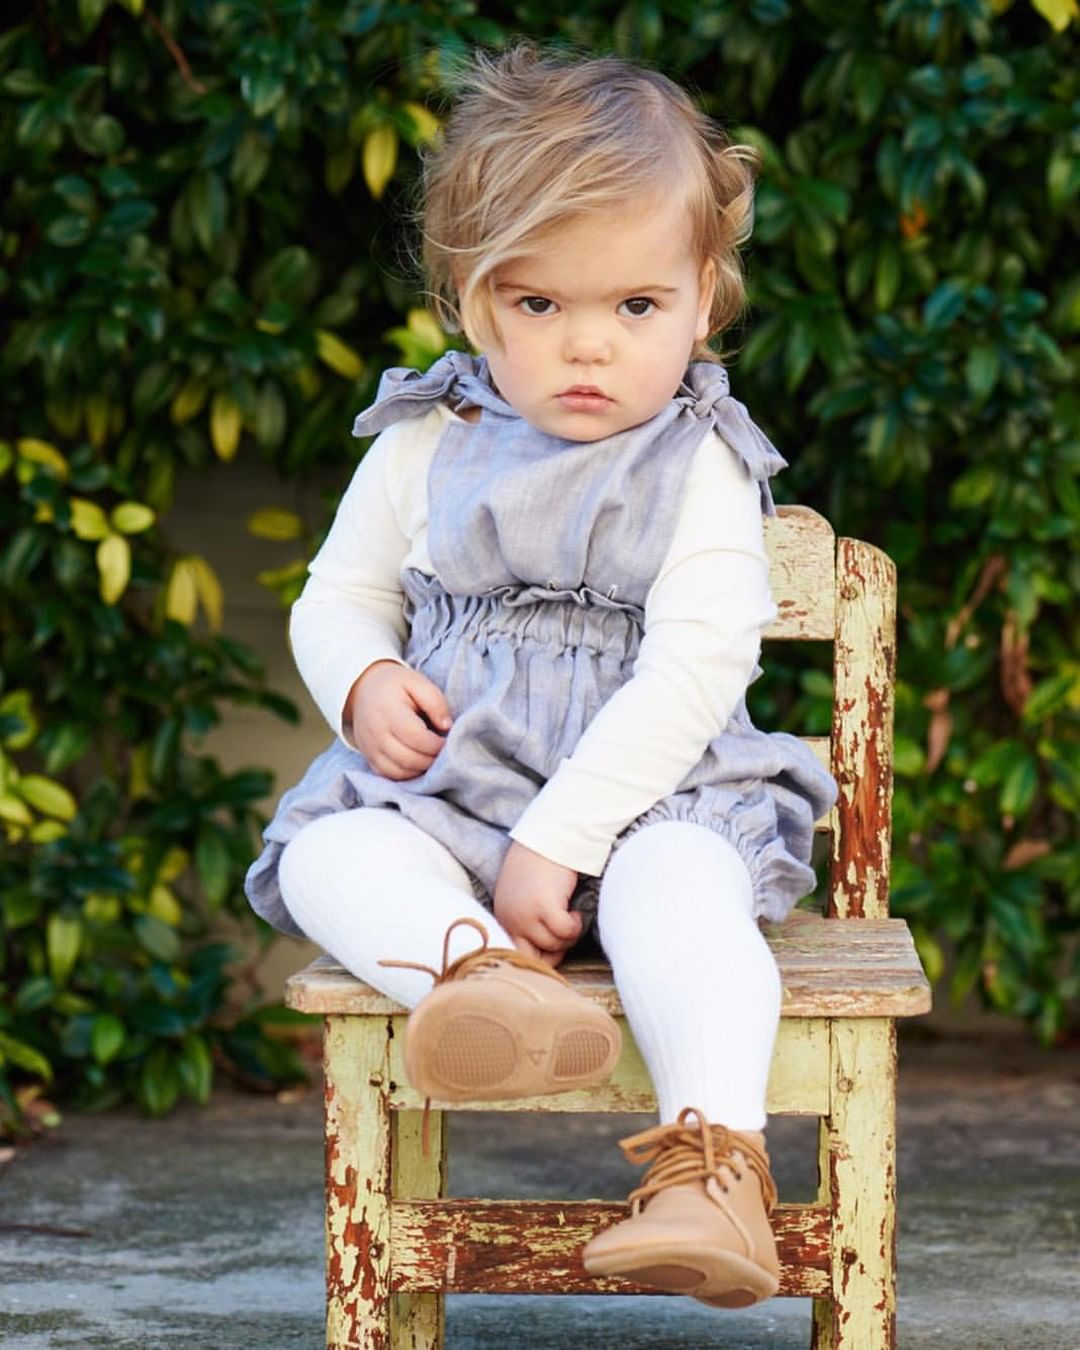 The best baby and toddler shoes that fit perfectly using our handy sizing and conversion chart guide - Kit & Kate